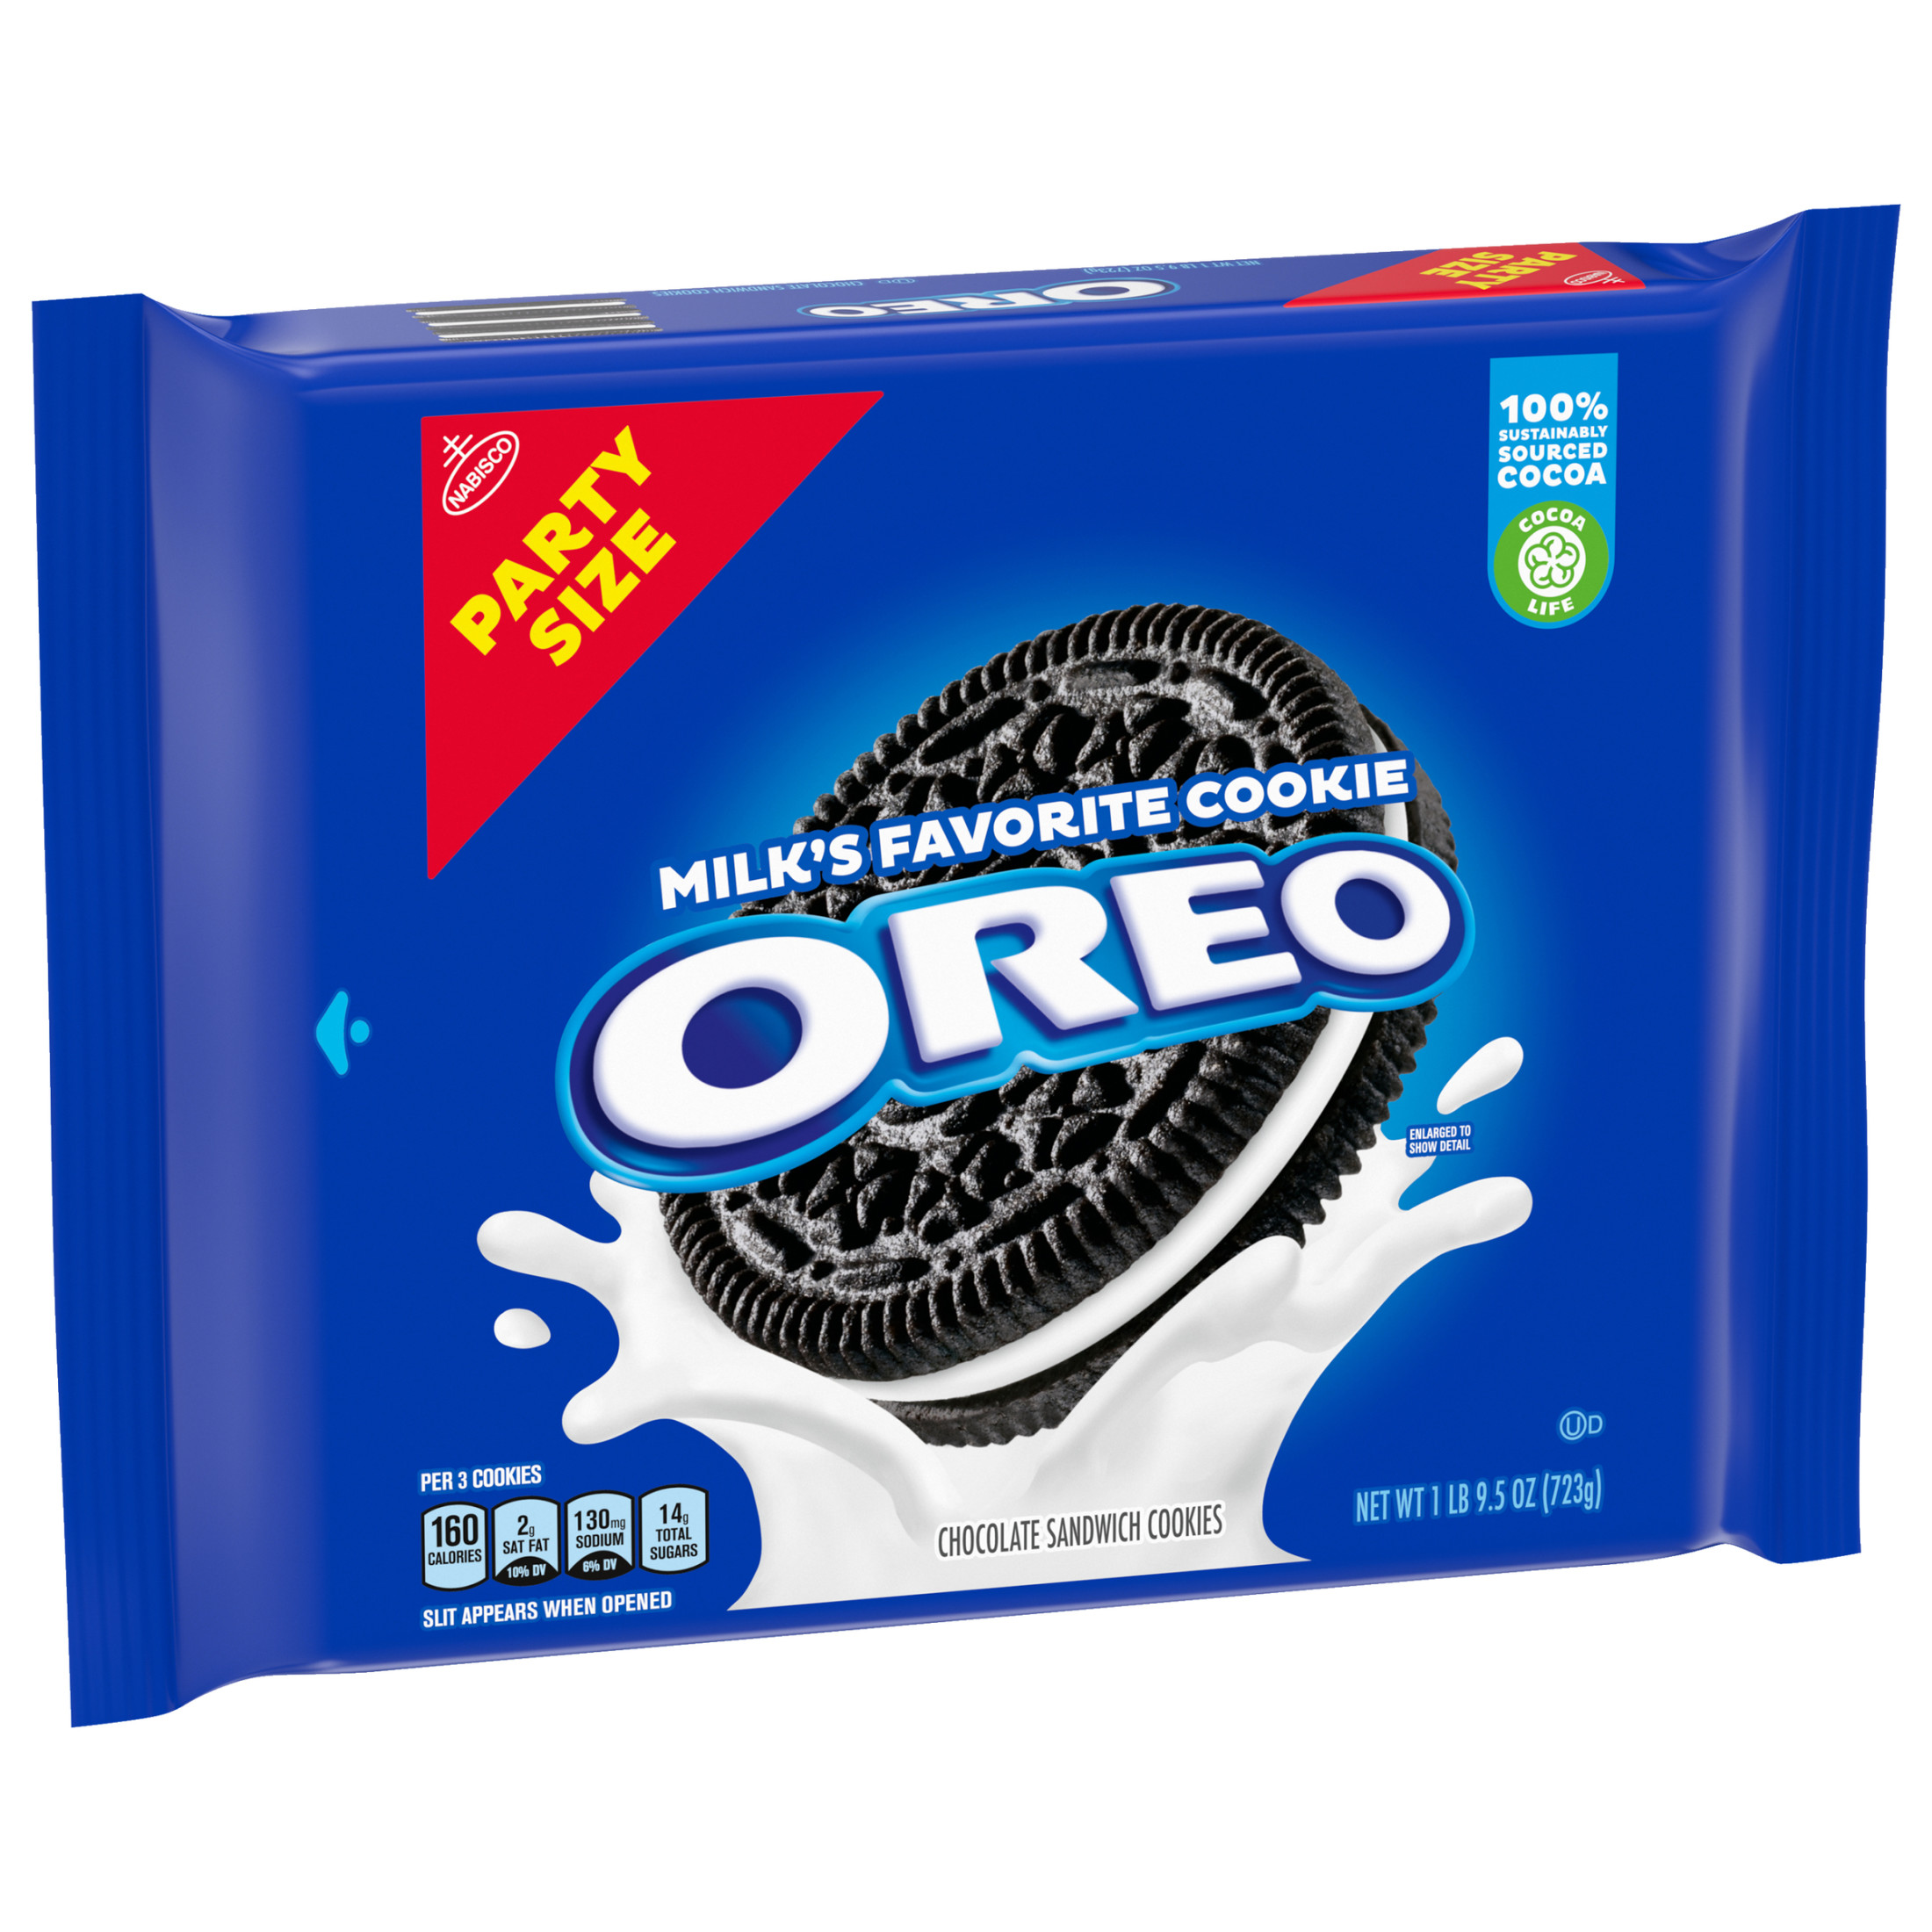 OREO Chocolate Sandwich Cookies, Party Size, 25.5 oz - image 3 of 15